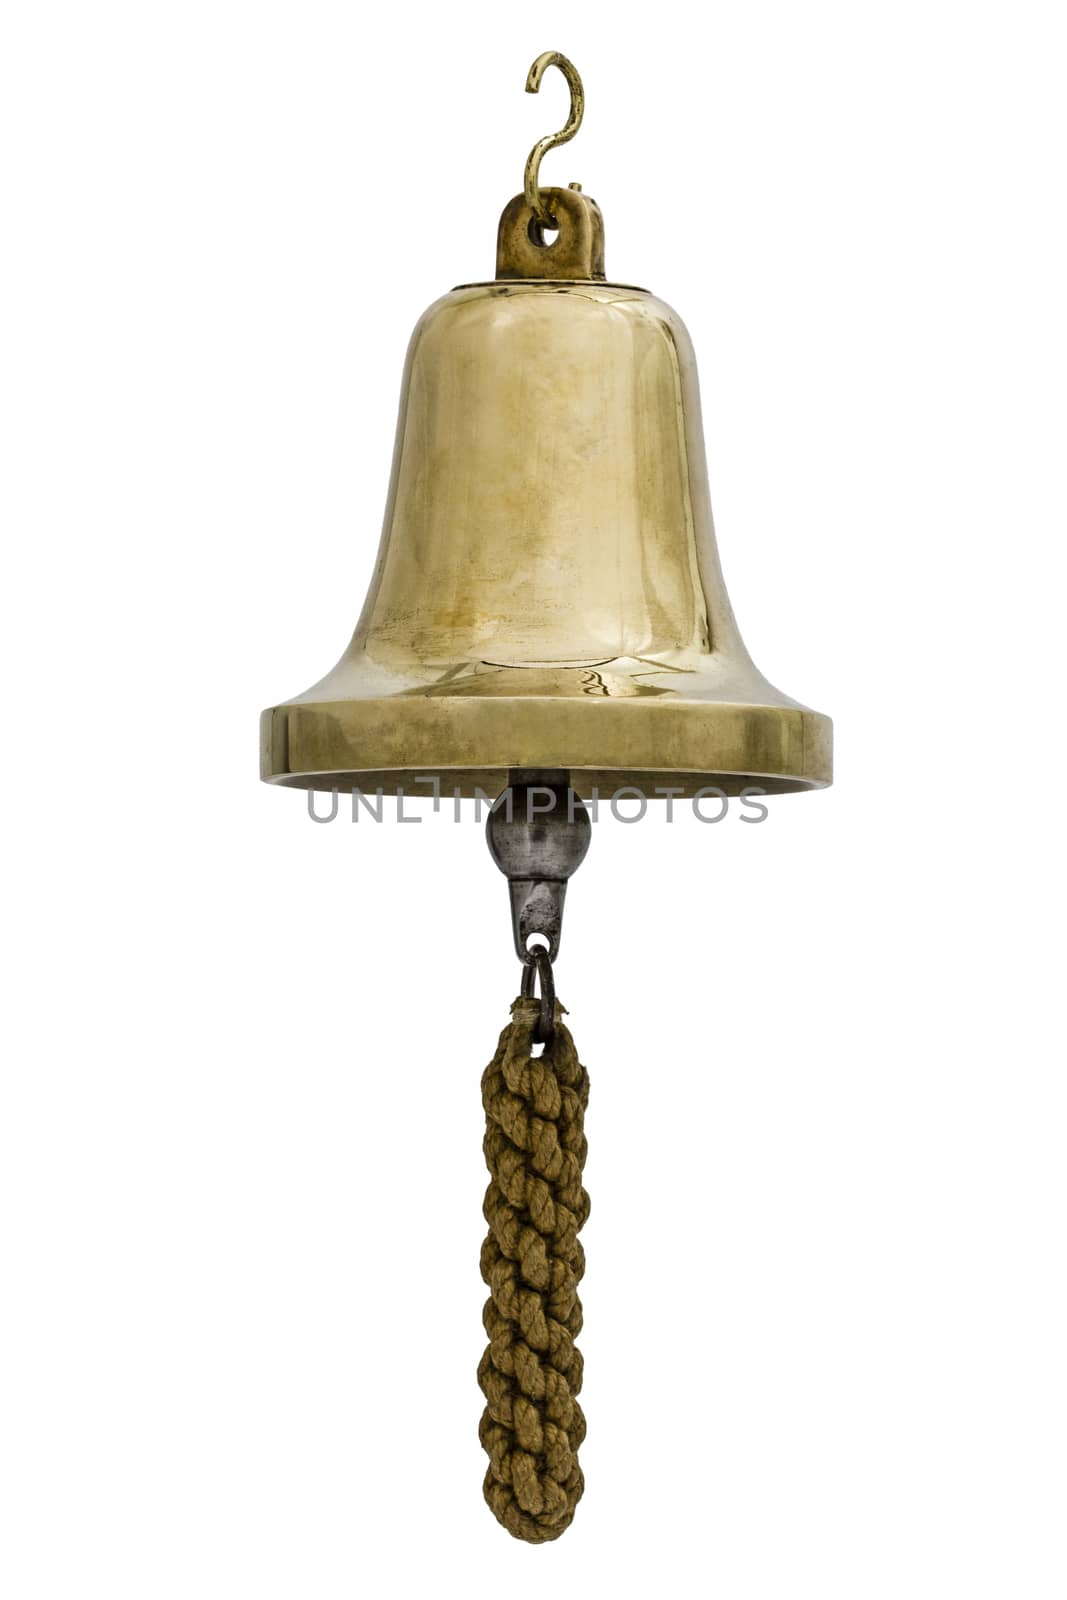 Brass bell, isolated on white background